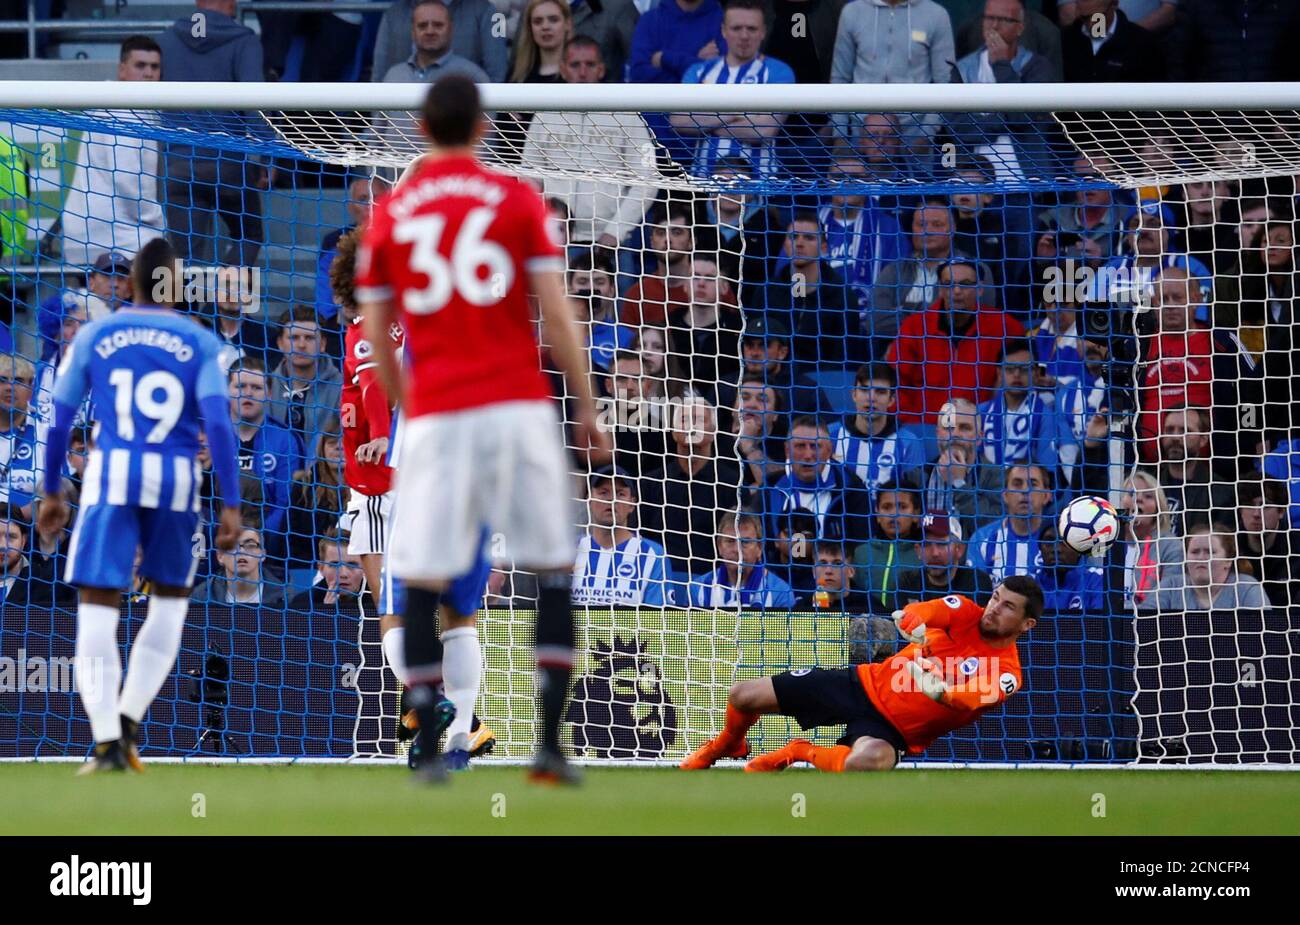 Soccer Football - Premier League - Brighton & Hove Albion v Manchester United - The American Express Community Stadium, Brighton, Britain - May 4, 2018   Manchester United's Marouane Fellaini scores a goal which is later disallowed   REUTERS/Eddie Keogh    EDITORIAL USE ONLY. No use with unauthorized audio, video, data, fixture lists, club/league logos or 'live' services. Online in-match use limited to 75 images, no video emulation. No use in betting, games or single club/league/player publications.  Please contact your account representative for further details. Stock Photo